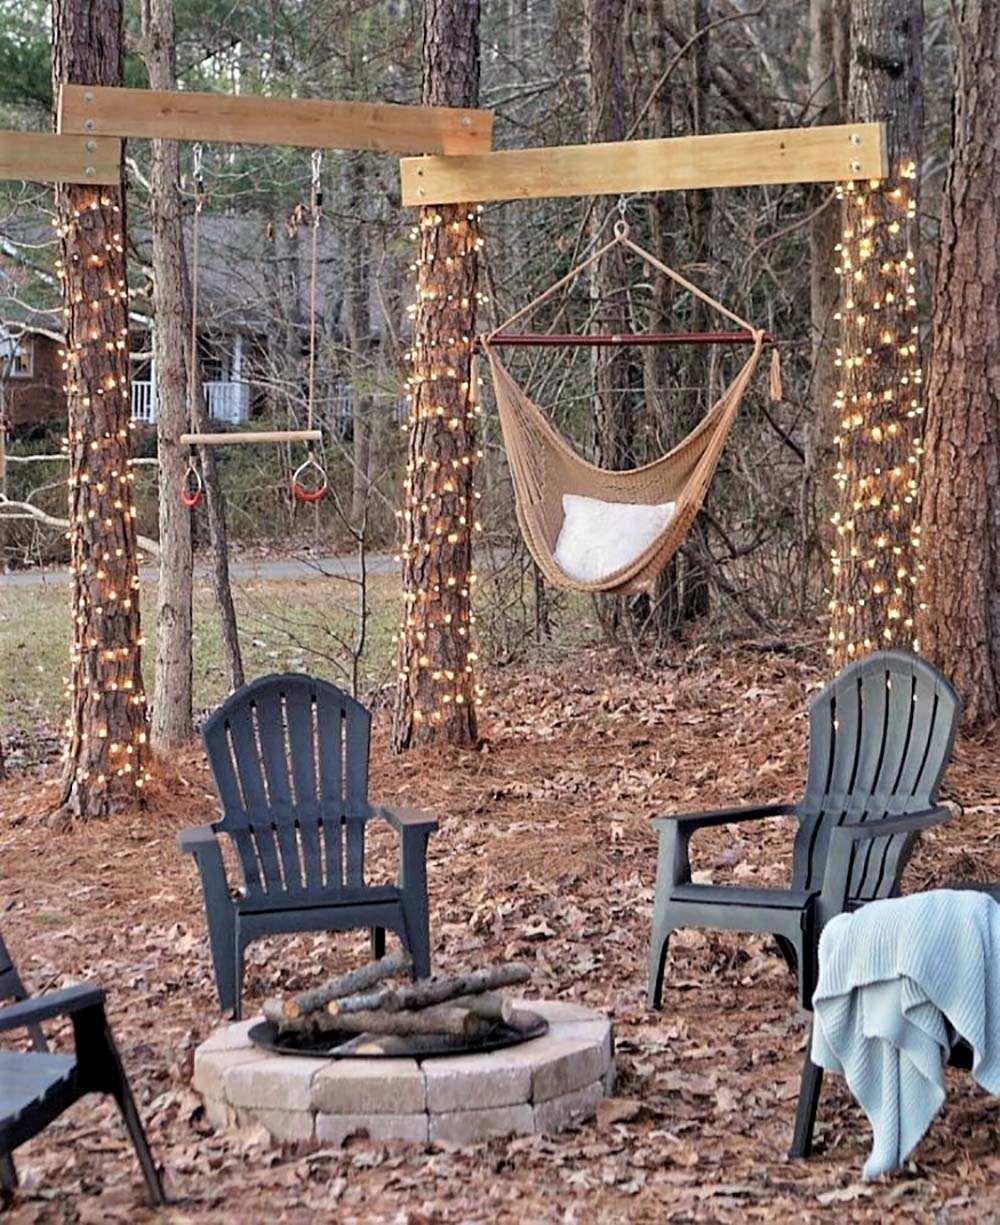 Chairs around the fire put and a hammock in the trees